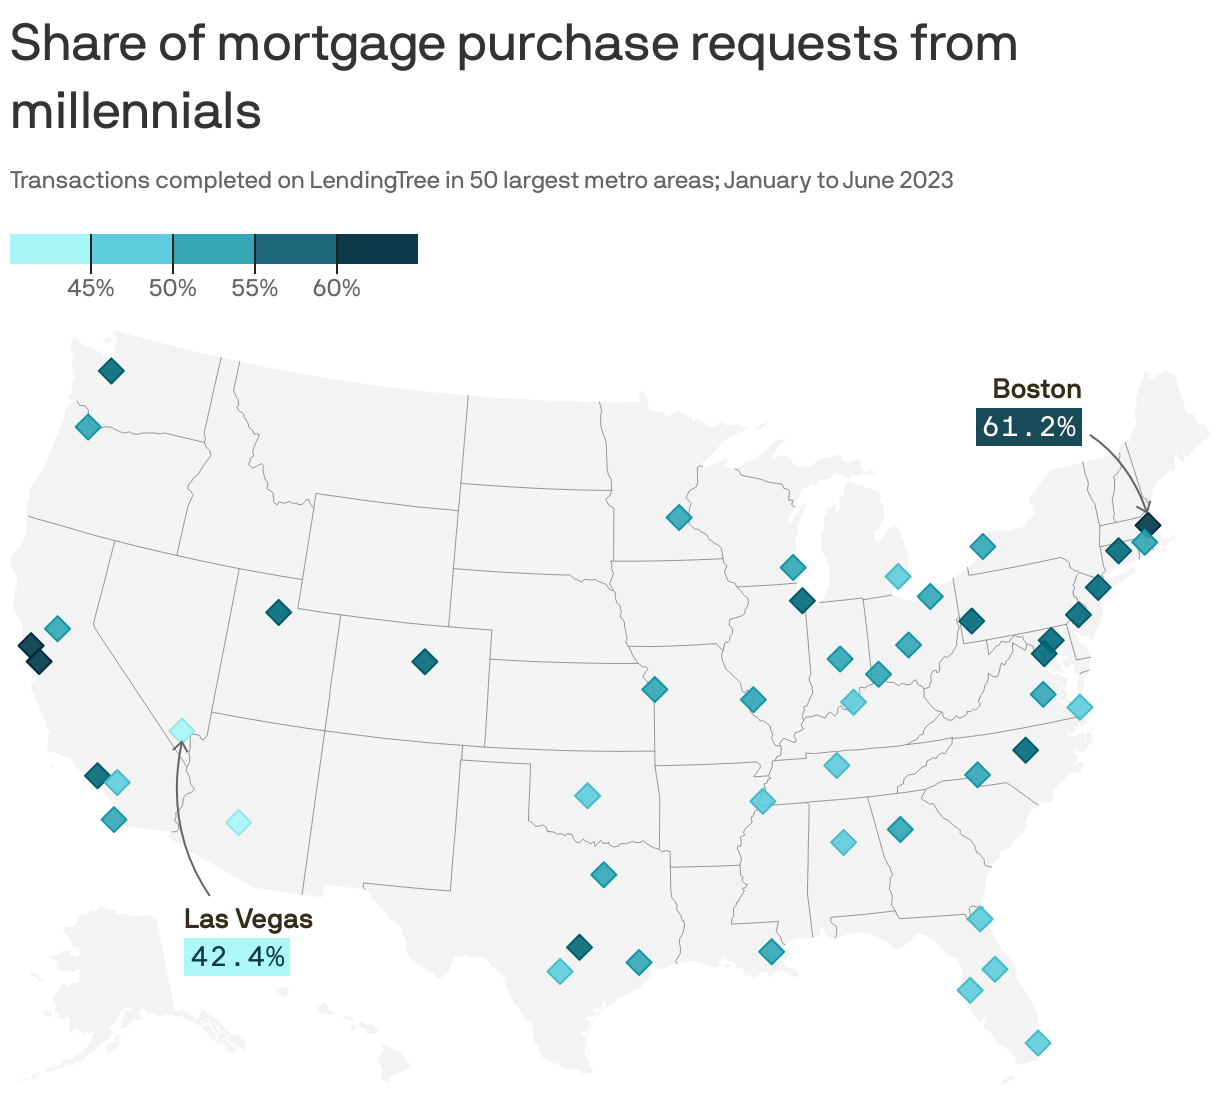 Share of mortgage purchase requests from millennials